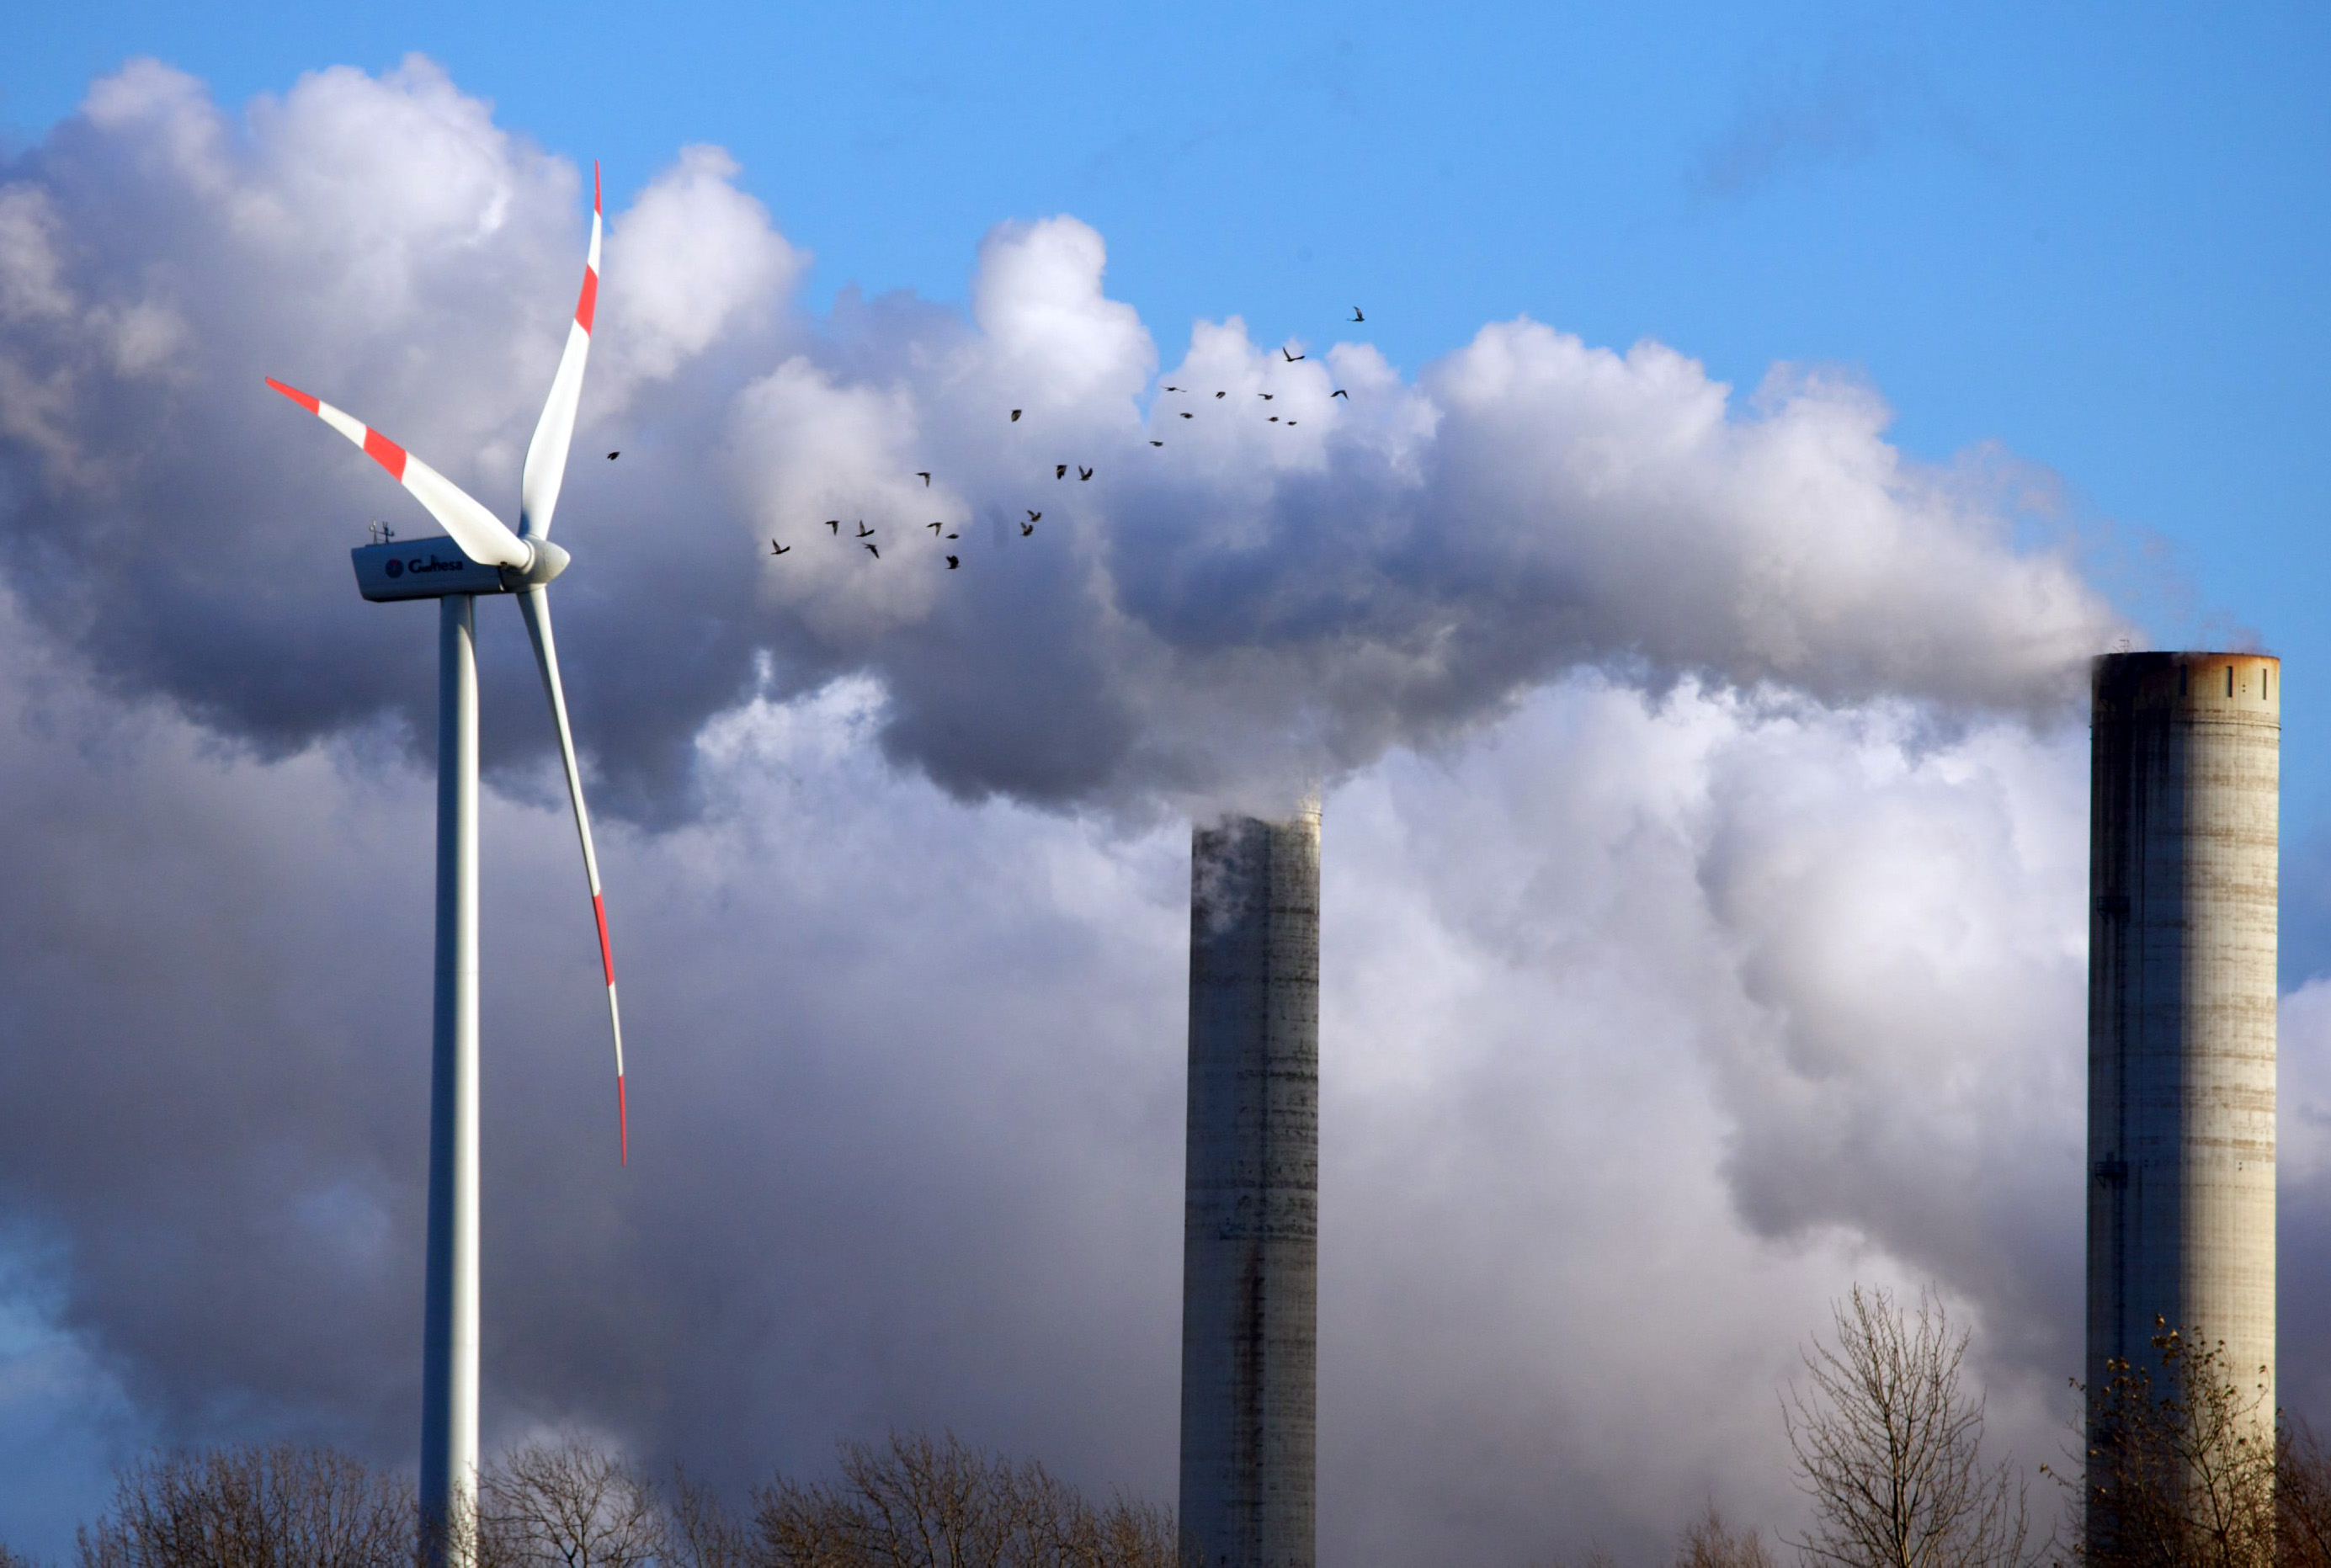 The Green Deal will require tougher emissions-reduction across the European economy.